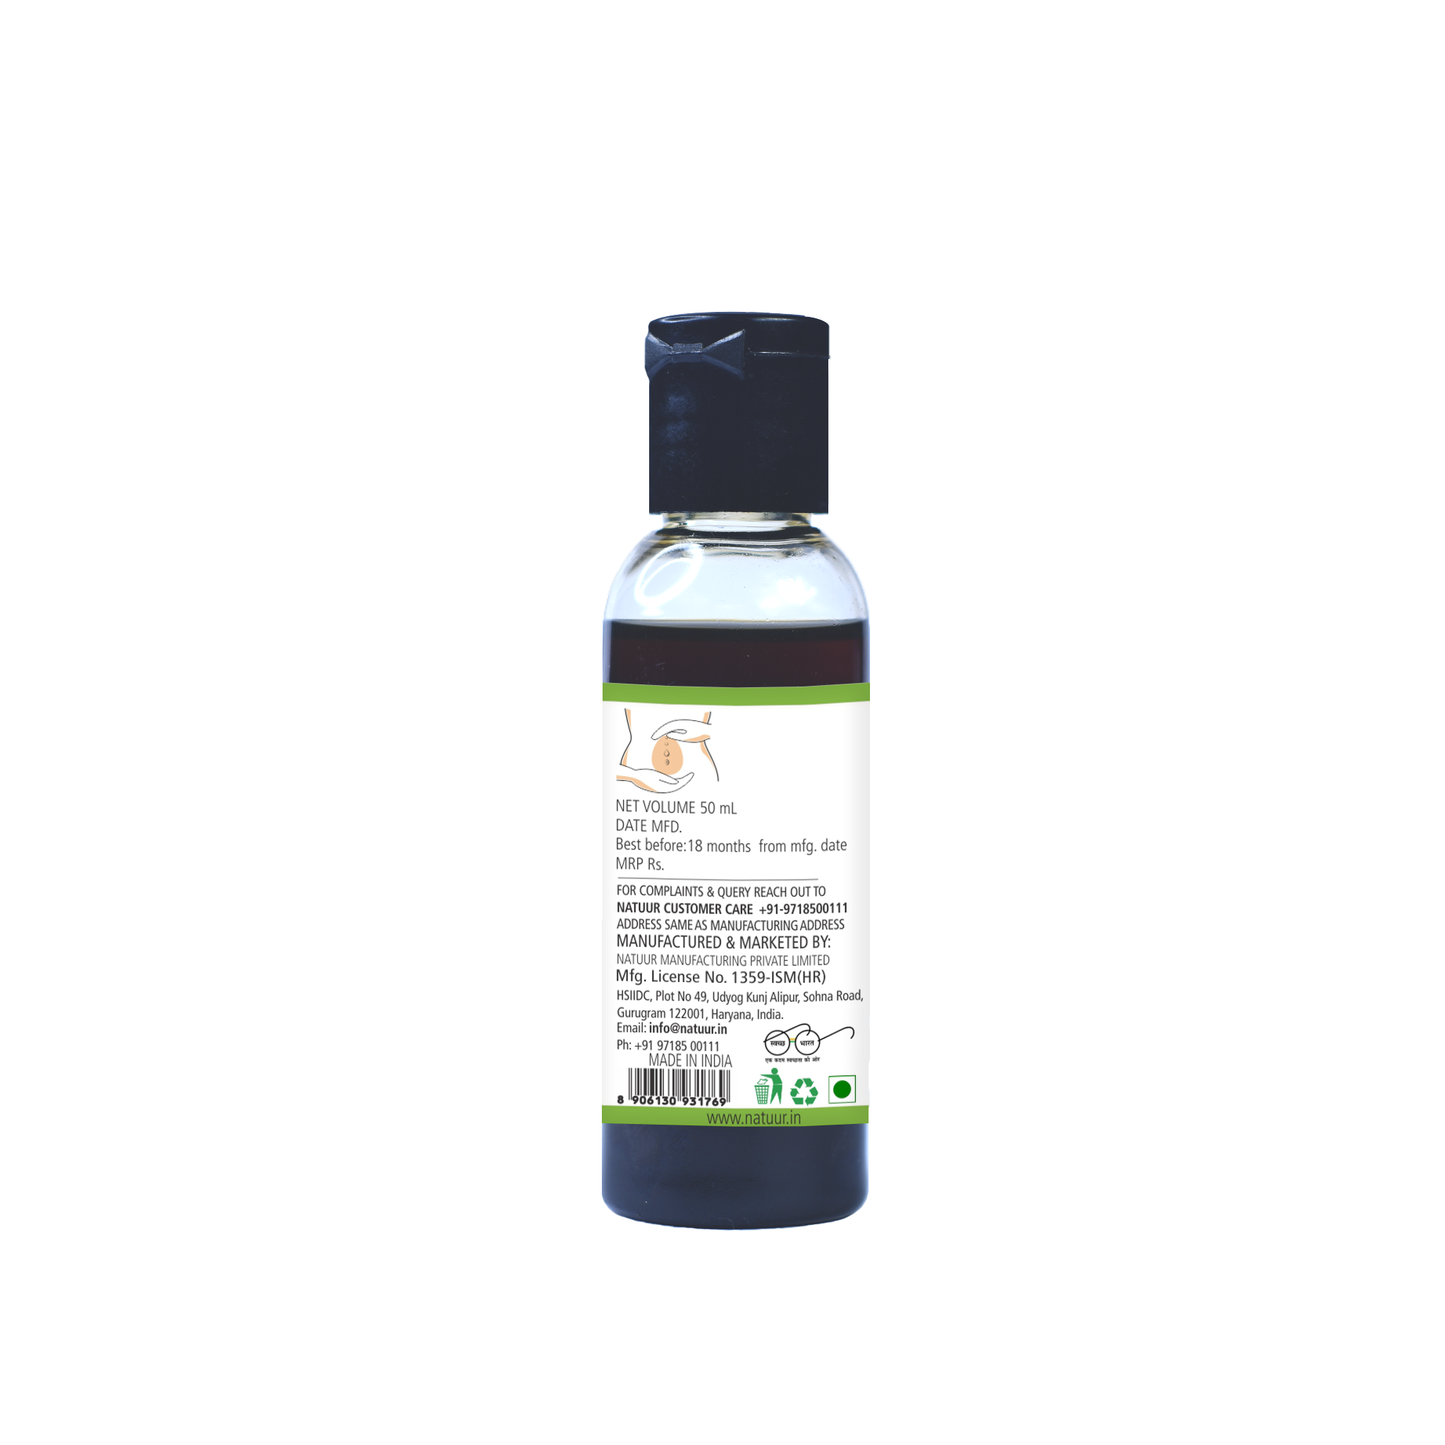 Belly Button Oil for Acne Control(50ml) - Natuur.in